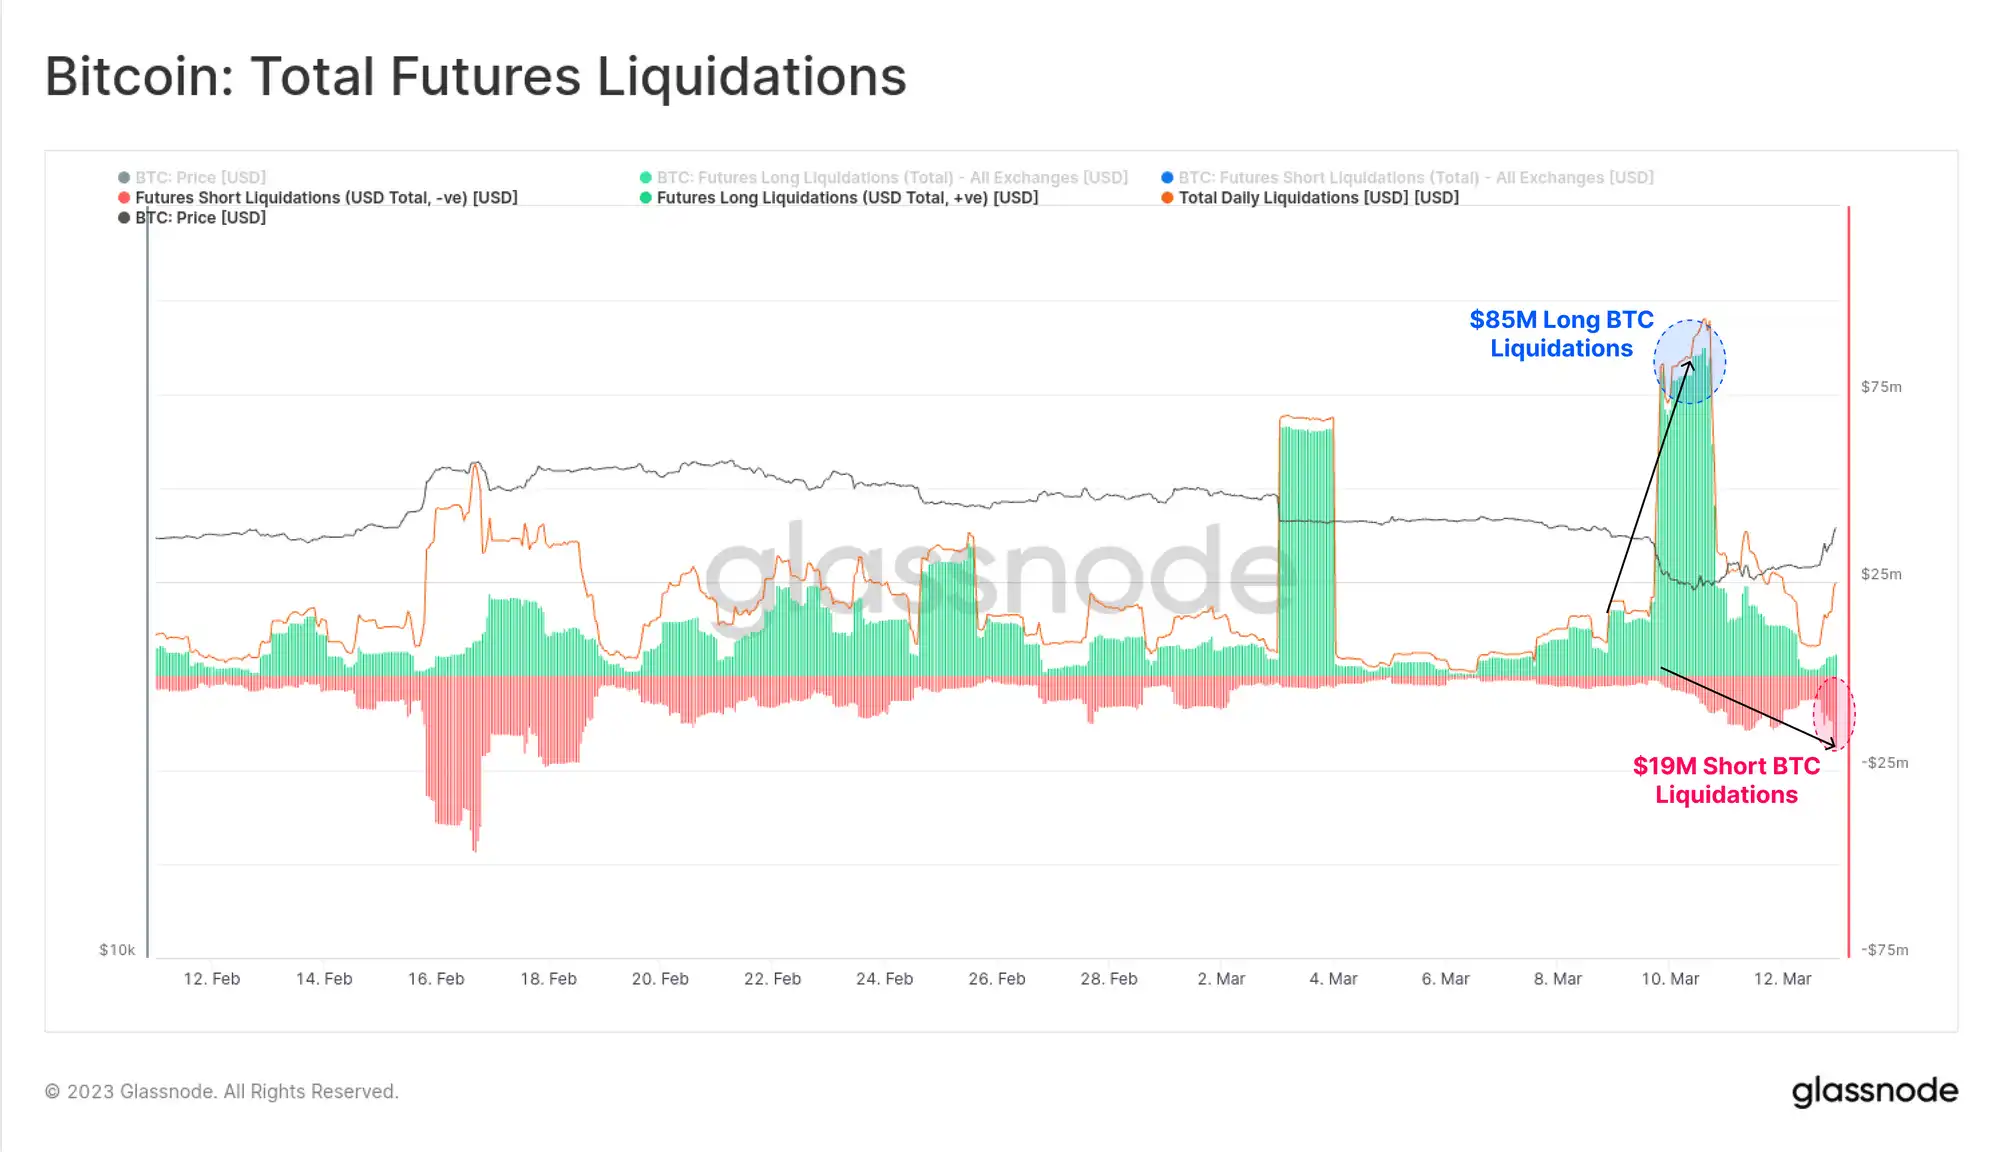 Glassnode: Volatility in Traditional Financial Markets Prompts Bitcoin for a 'V-Shaped' Reversal